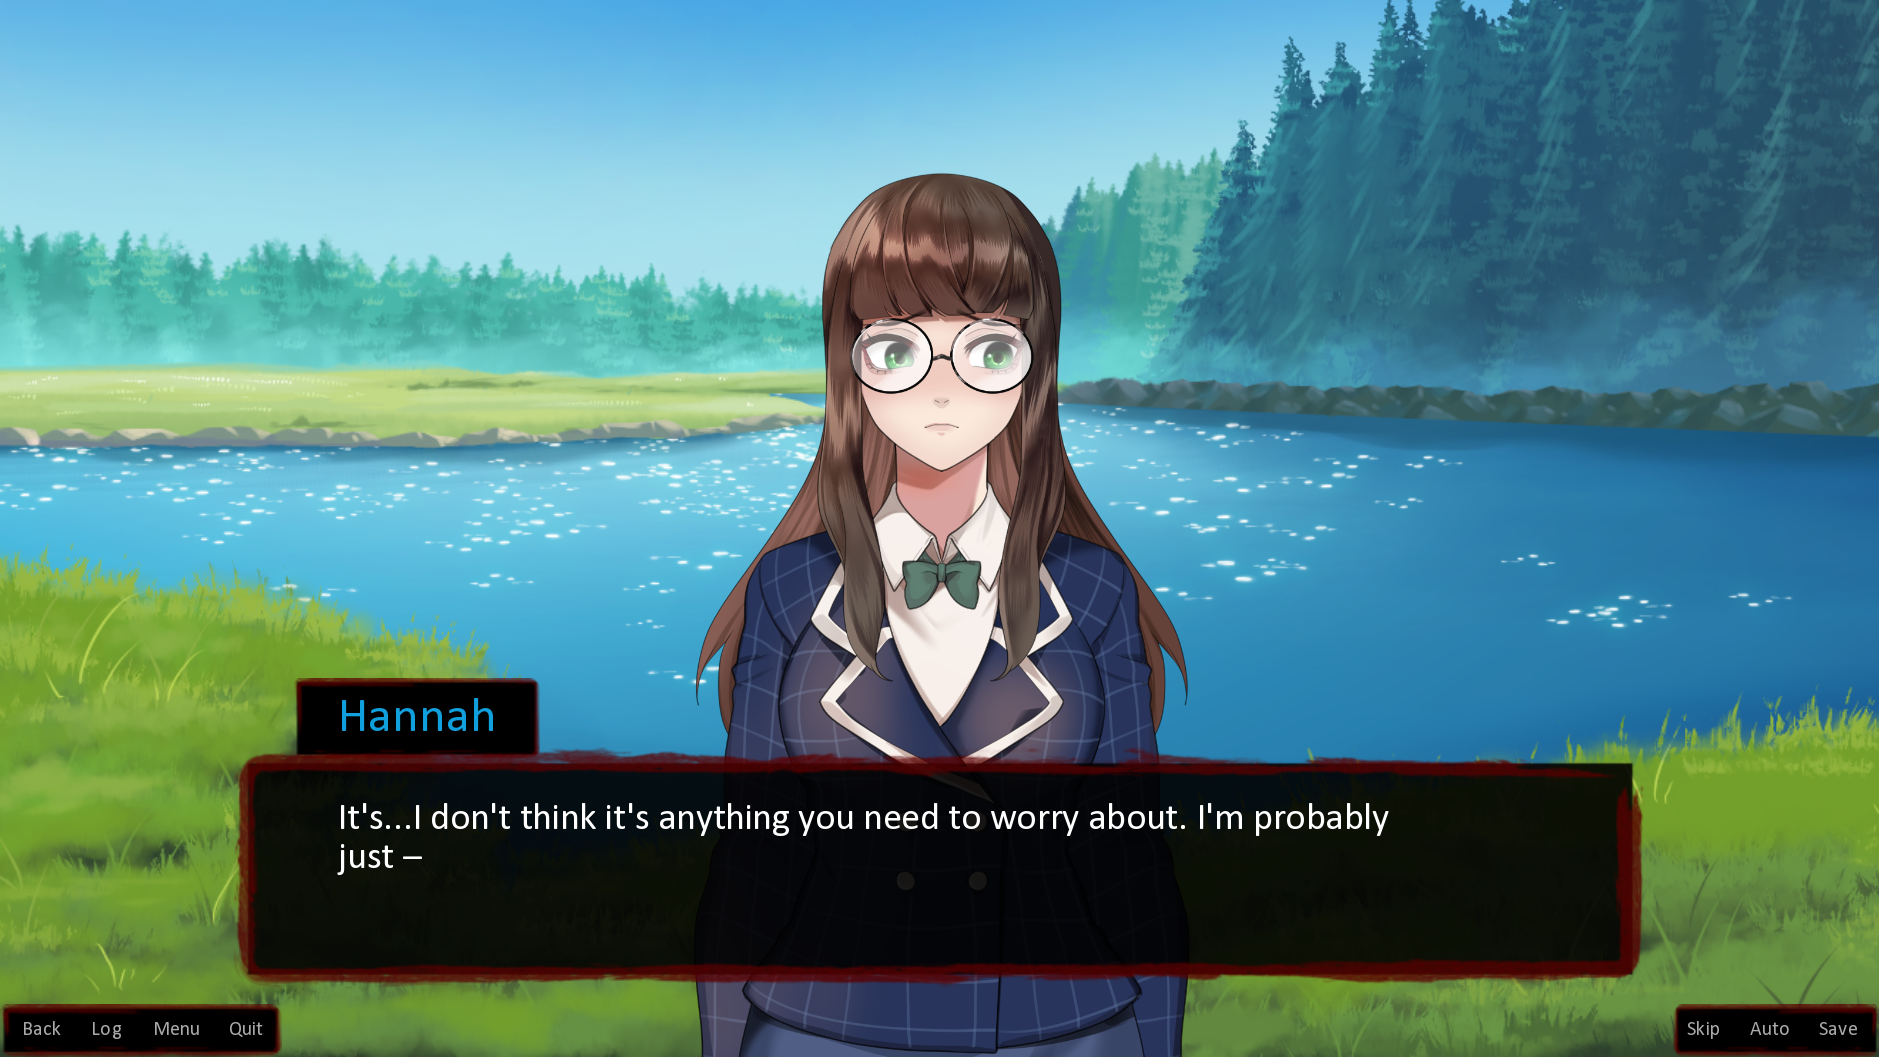 A screenshot from the visual novel The Many Deaths of Lily Kosen. The character Hannah is talking to the protagonist and looks worried.